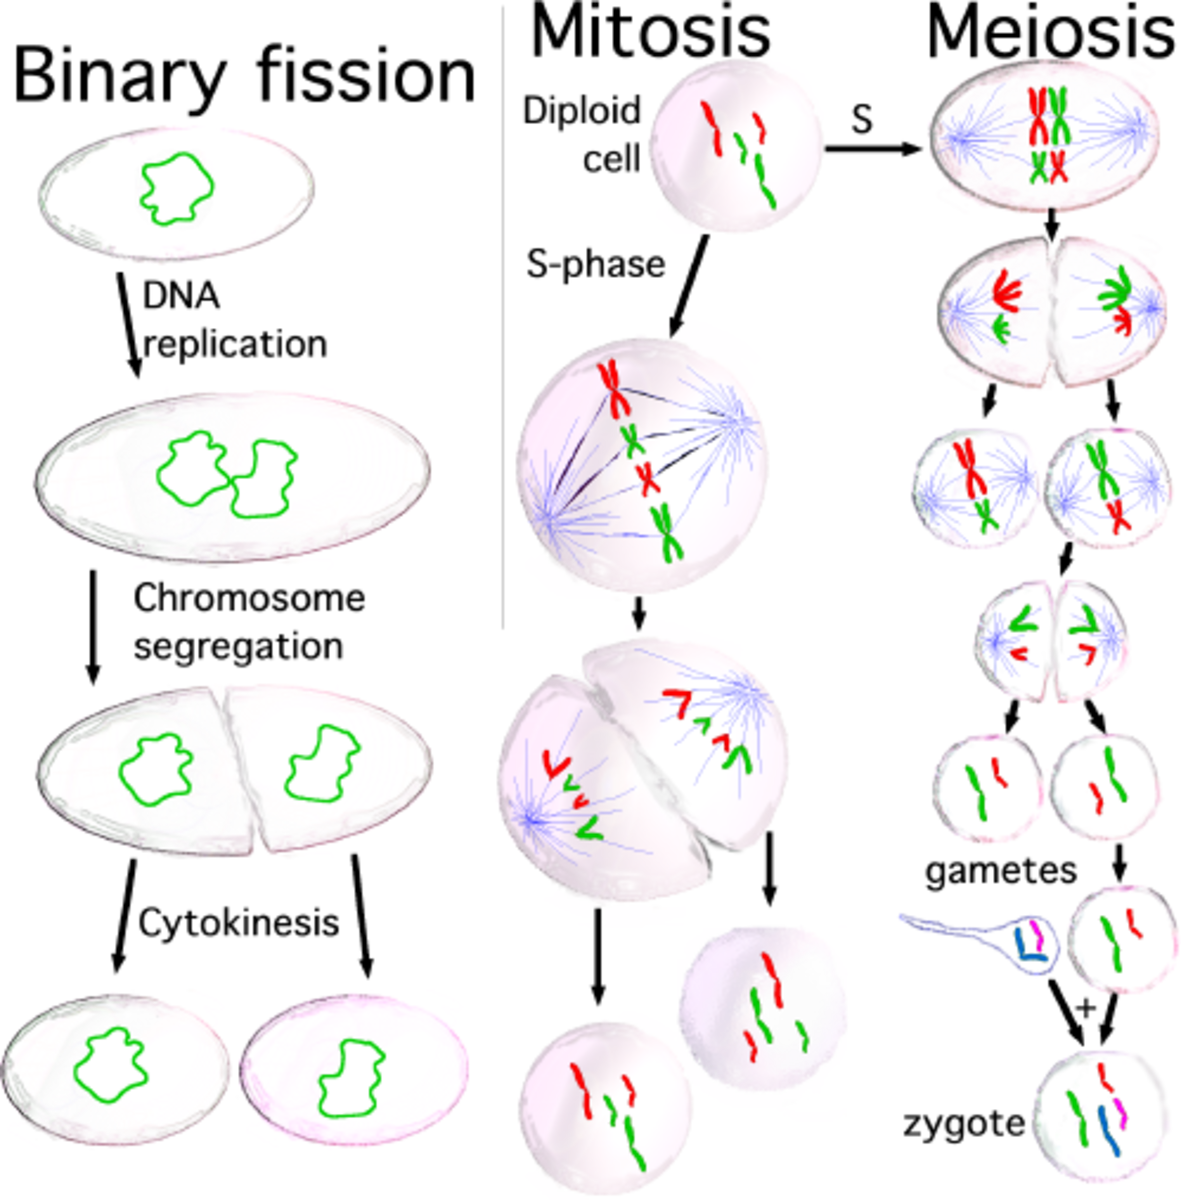 stages of mitosis in order with description